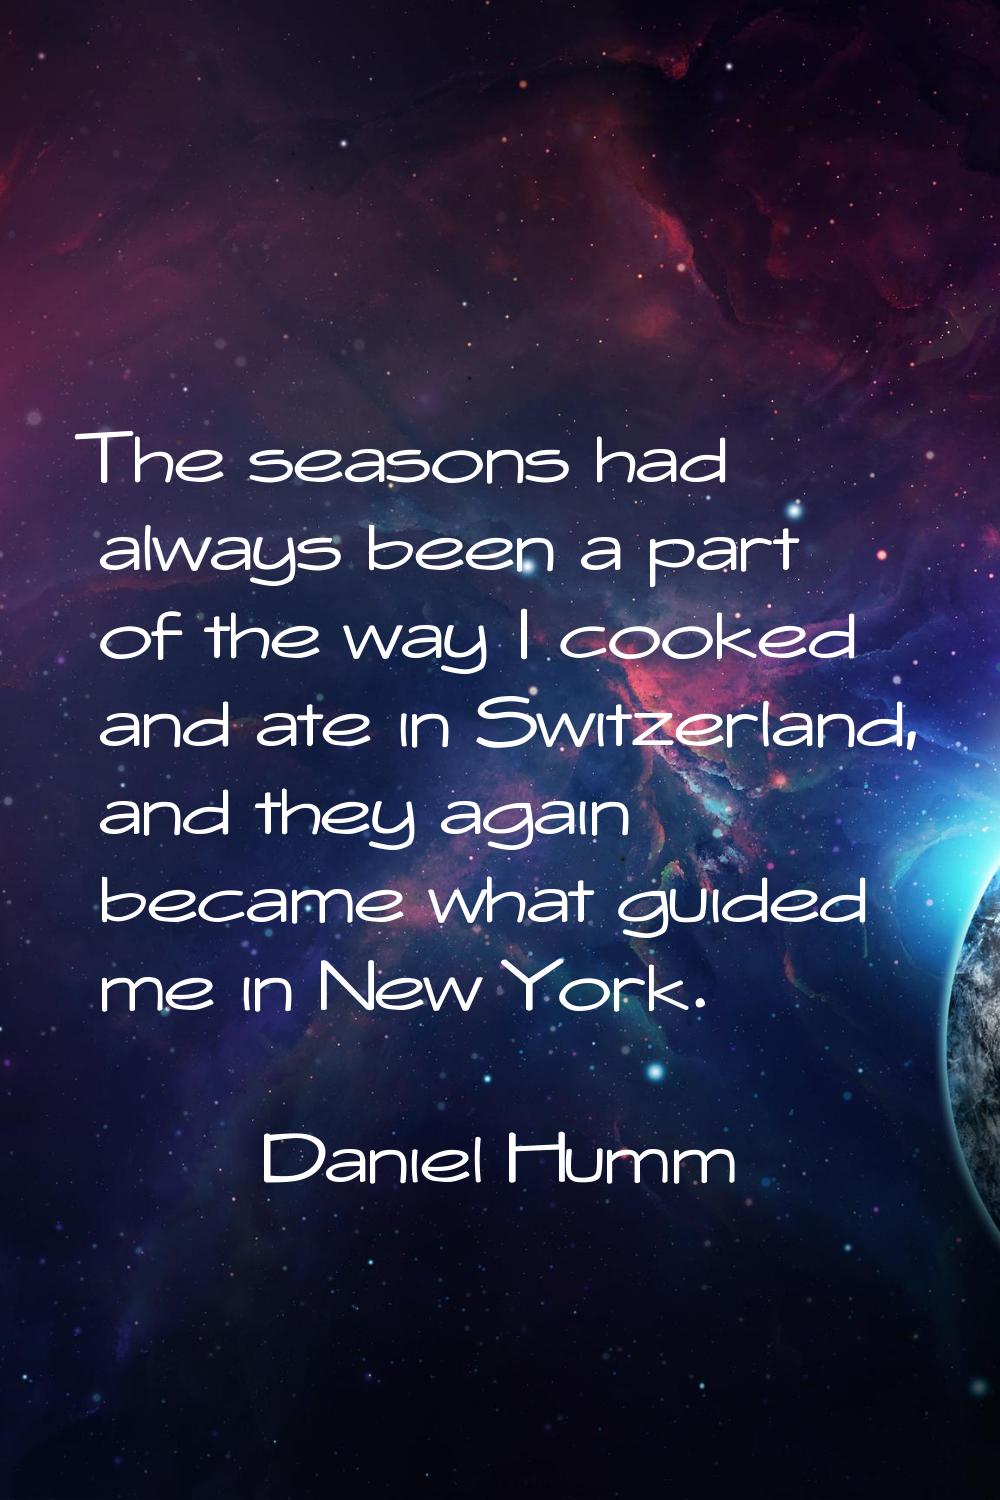 The seasons had always been a part of the way I cooked and ate in Switzerland, and they again becam